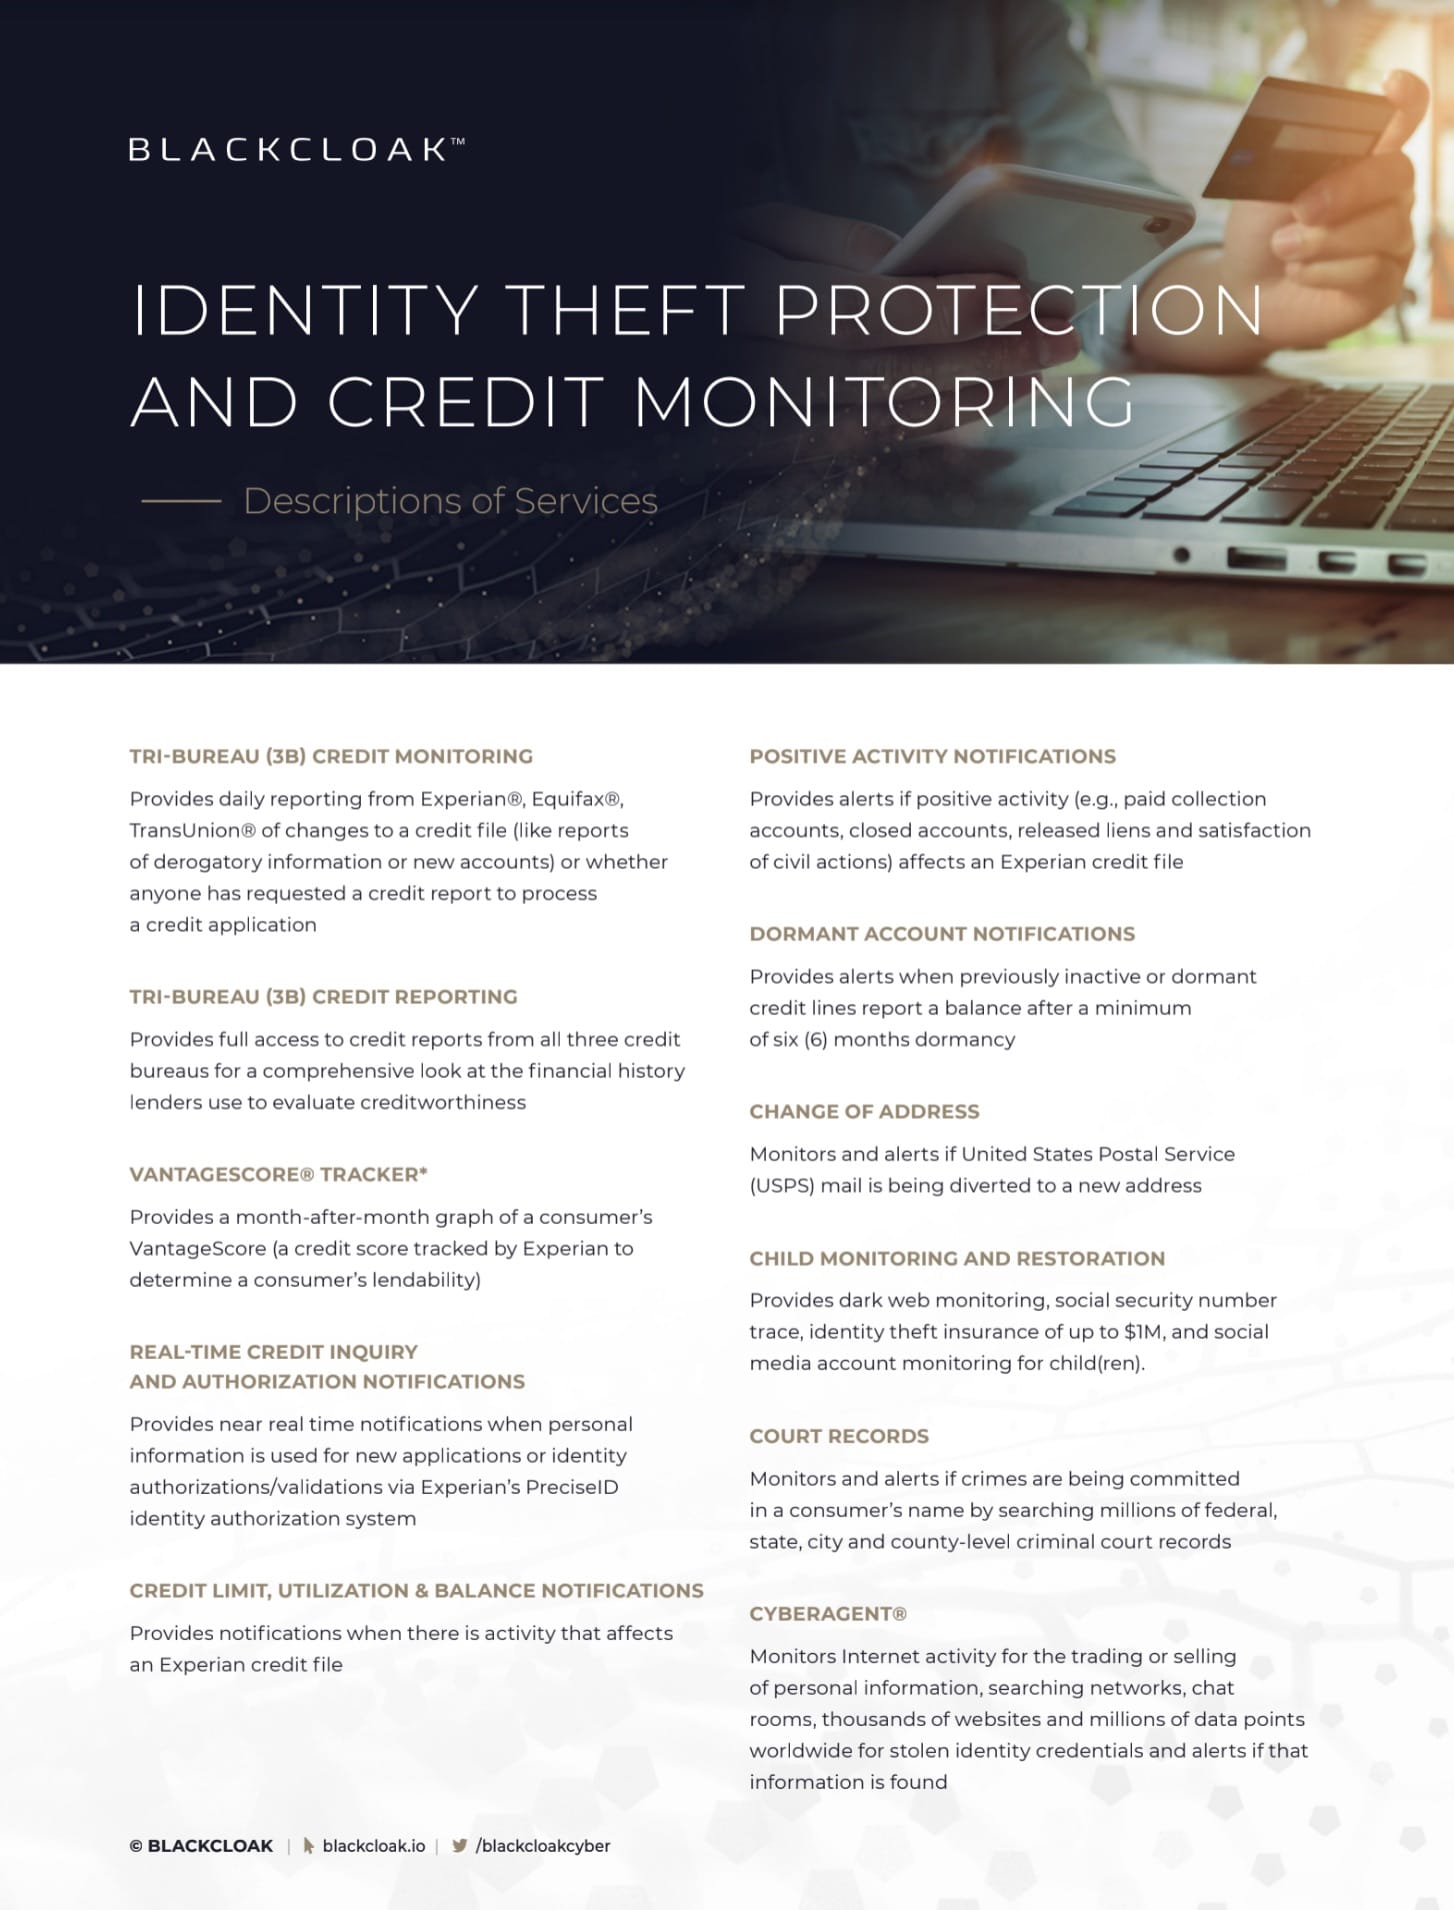 Identity Theft Protection Services and Credit Monitoring